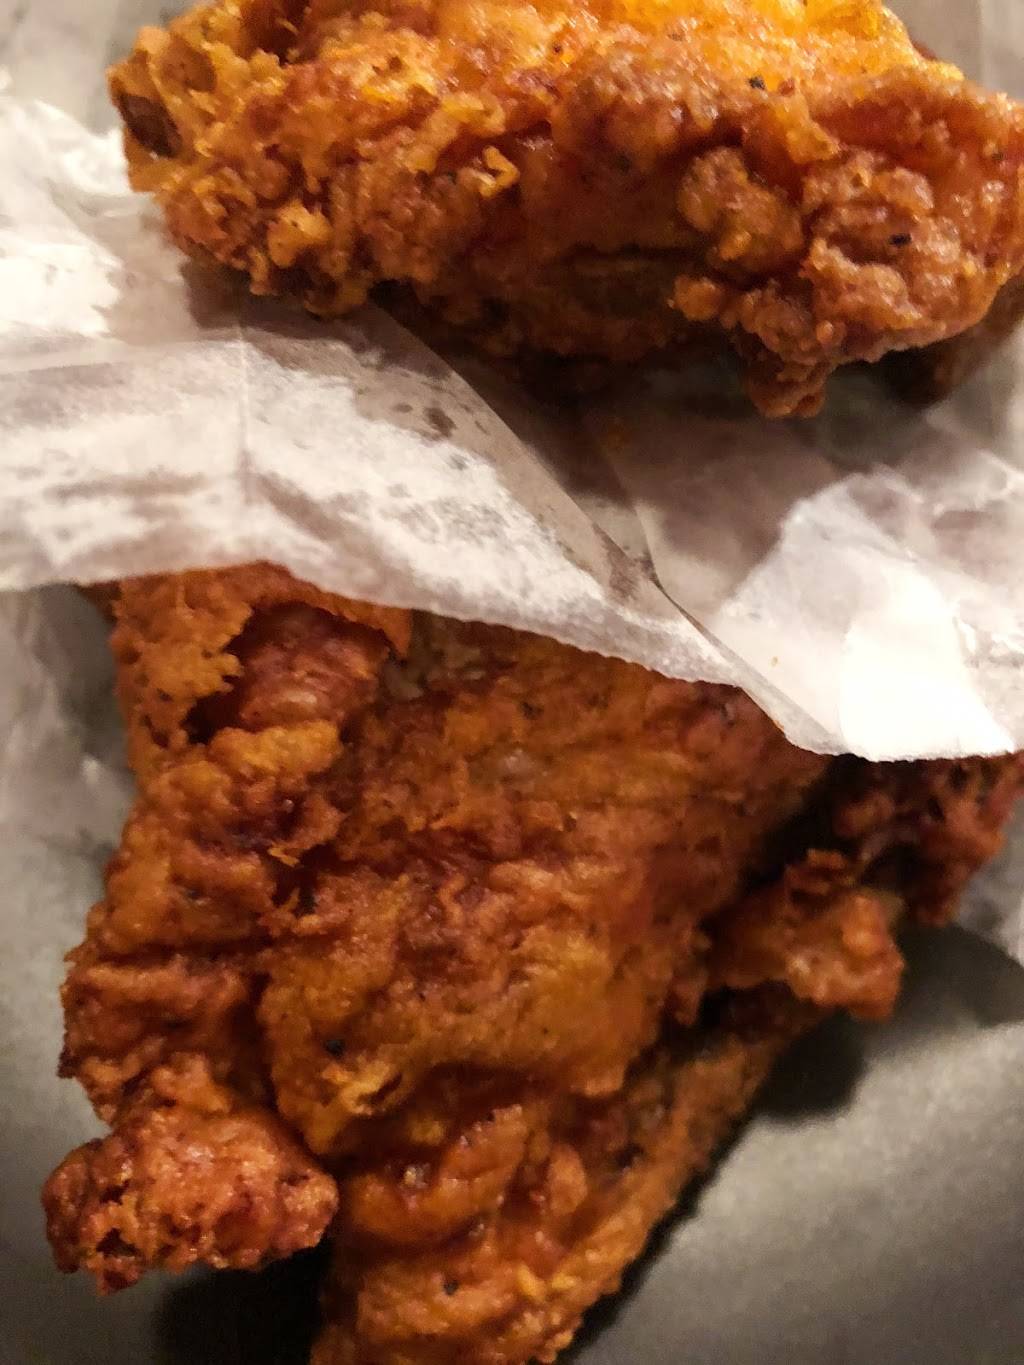 Crown Fried Chicken | restaurant | 117 Avenue D, New York, NY 10009, USA | 2129822850 OR +1 212-982-2850